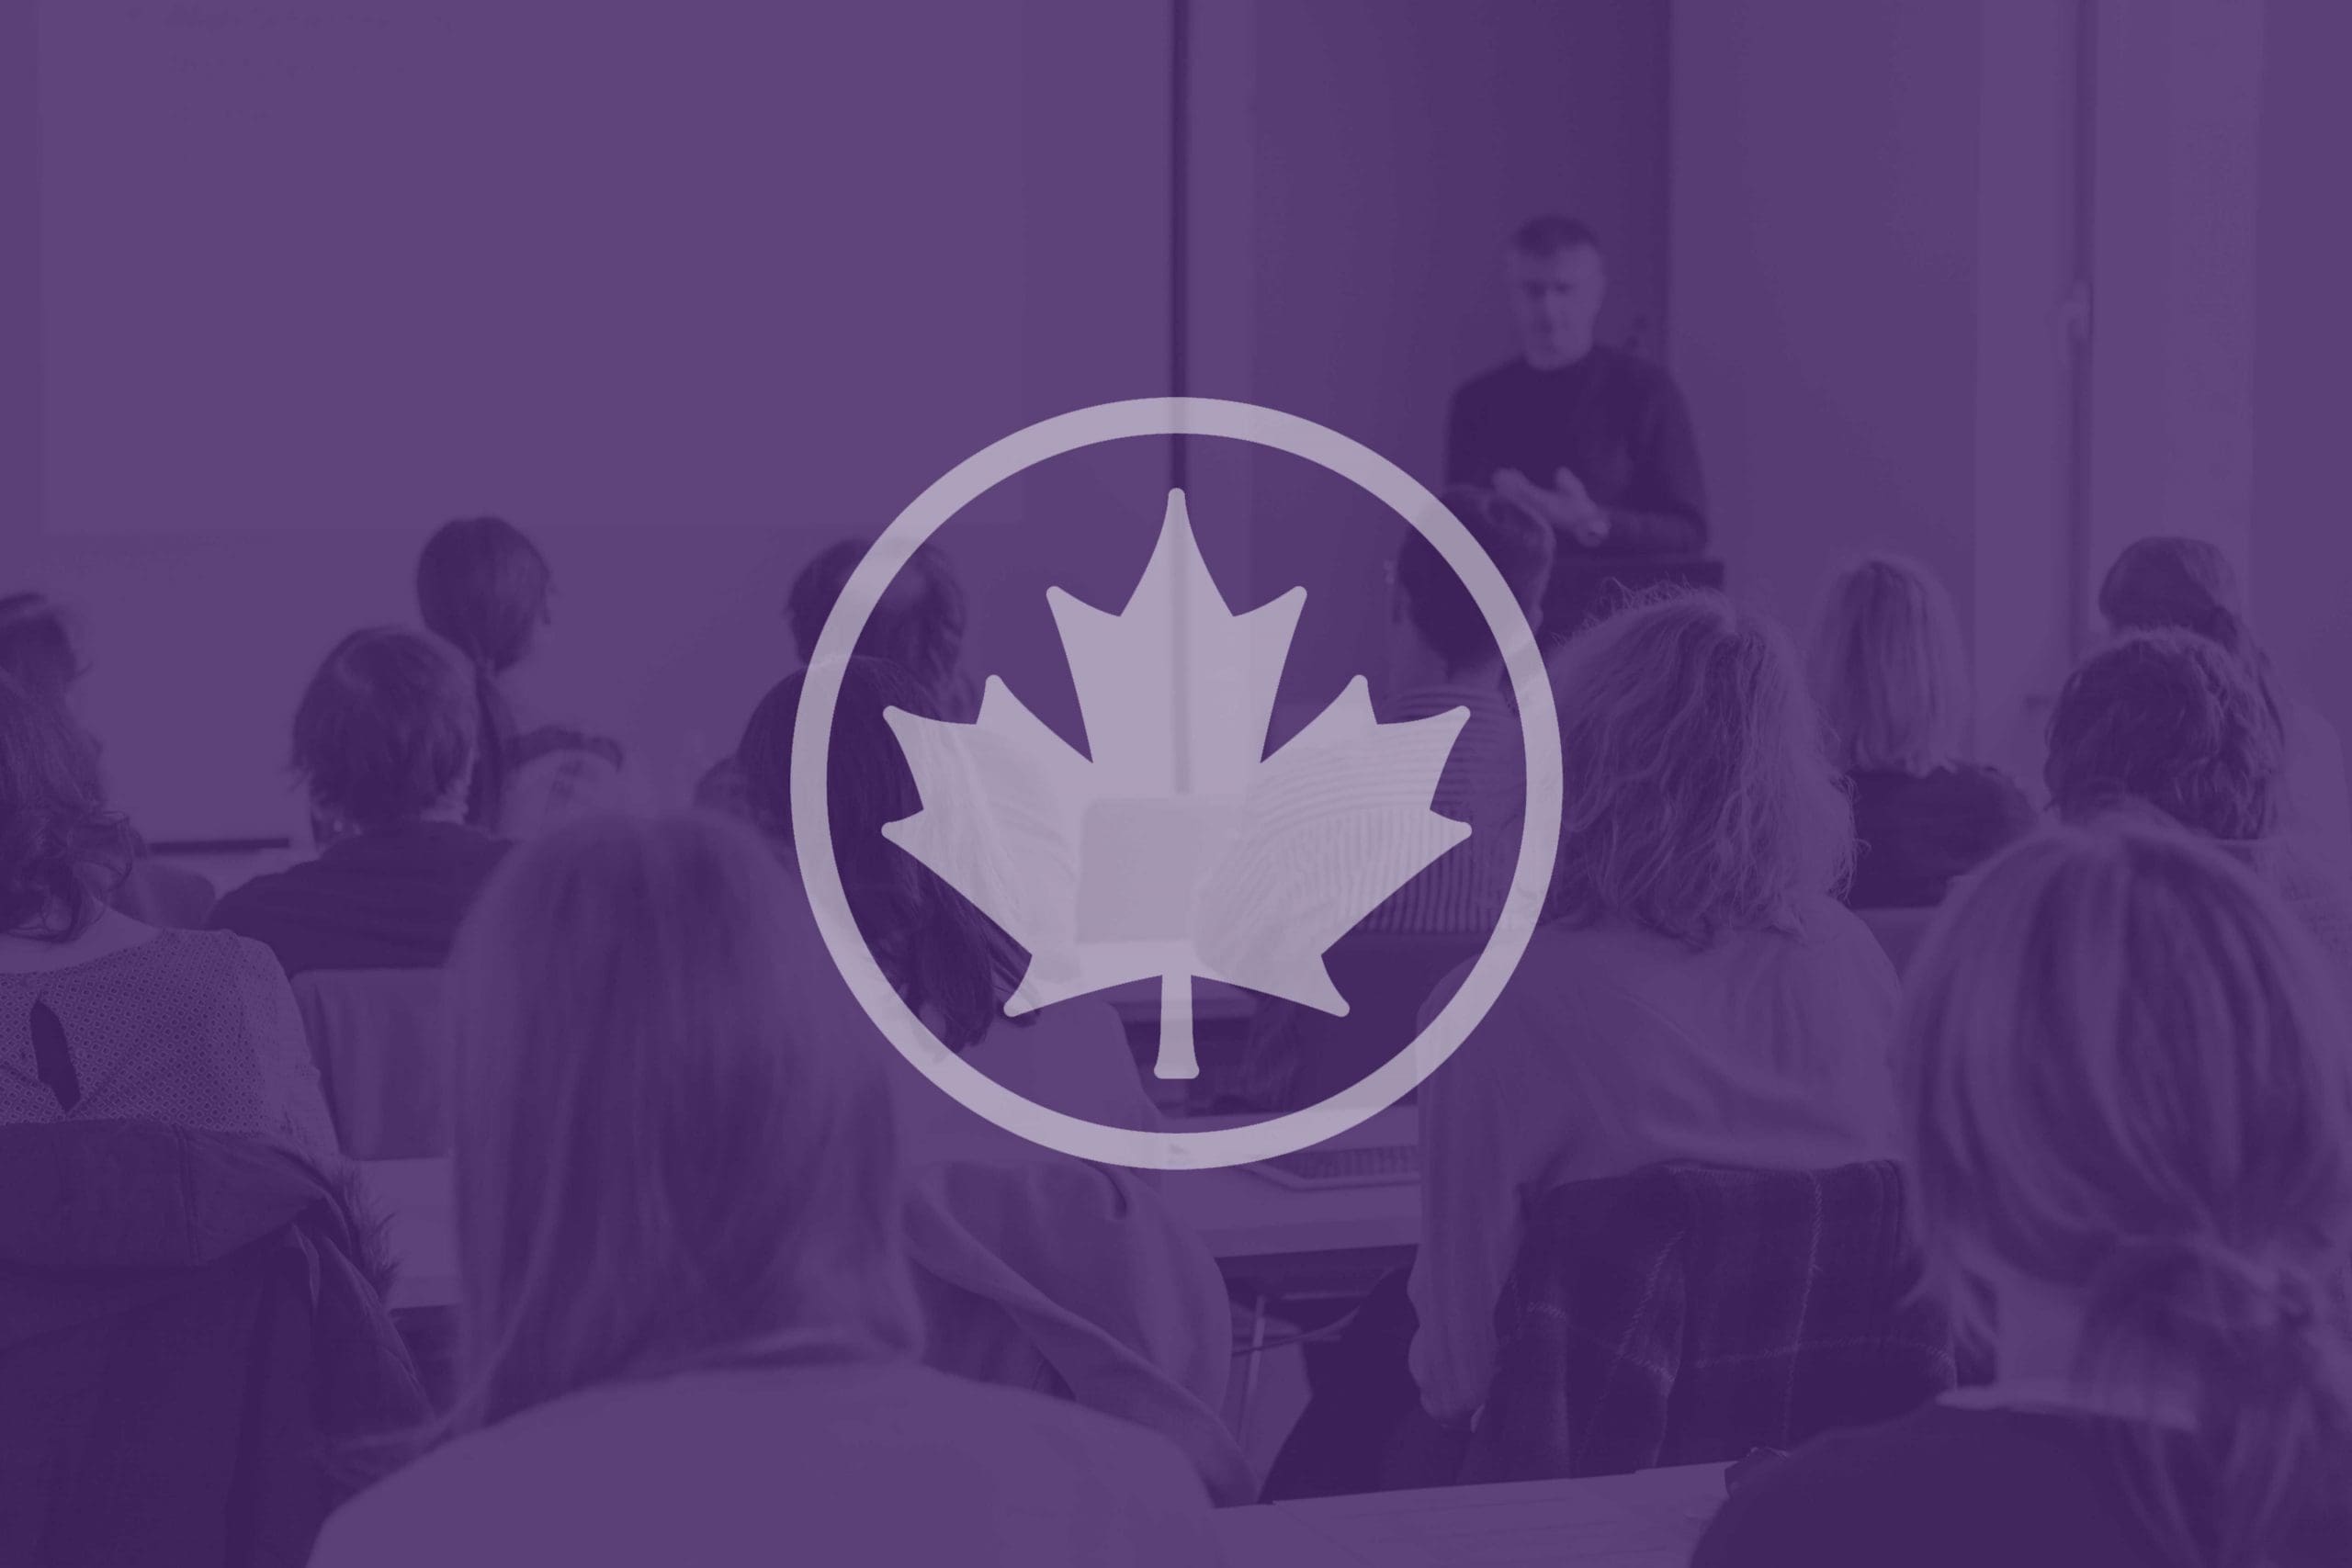 Outline of the Canada leaf on top of a teacher meeting